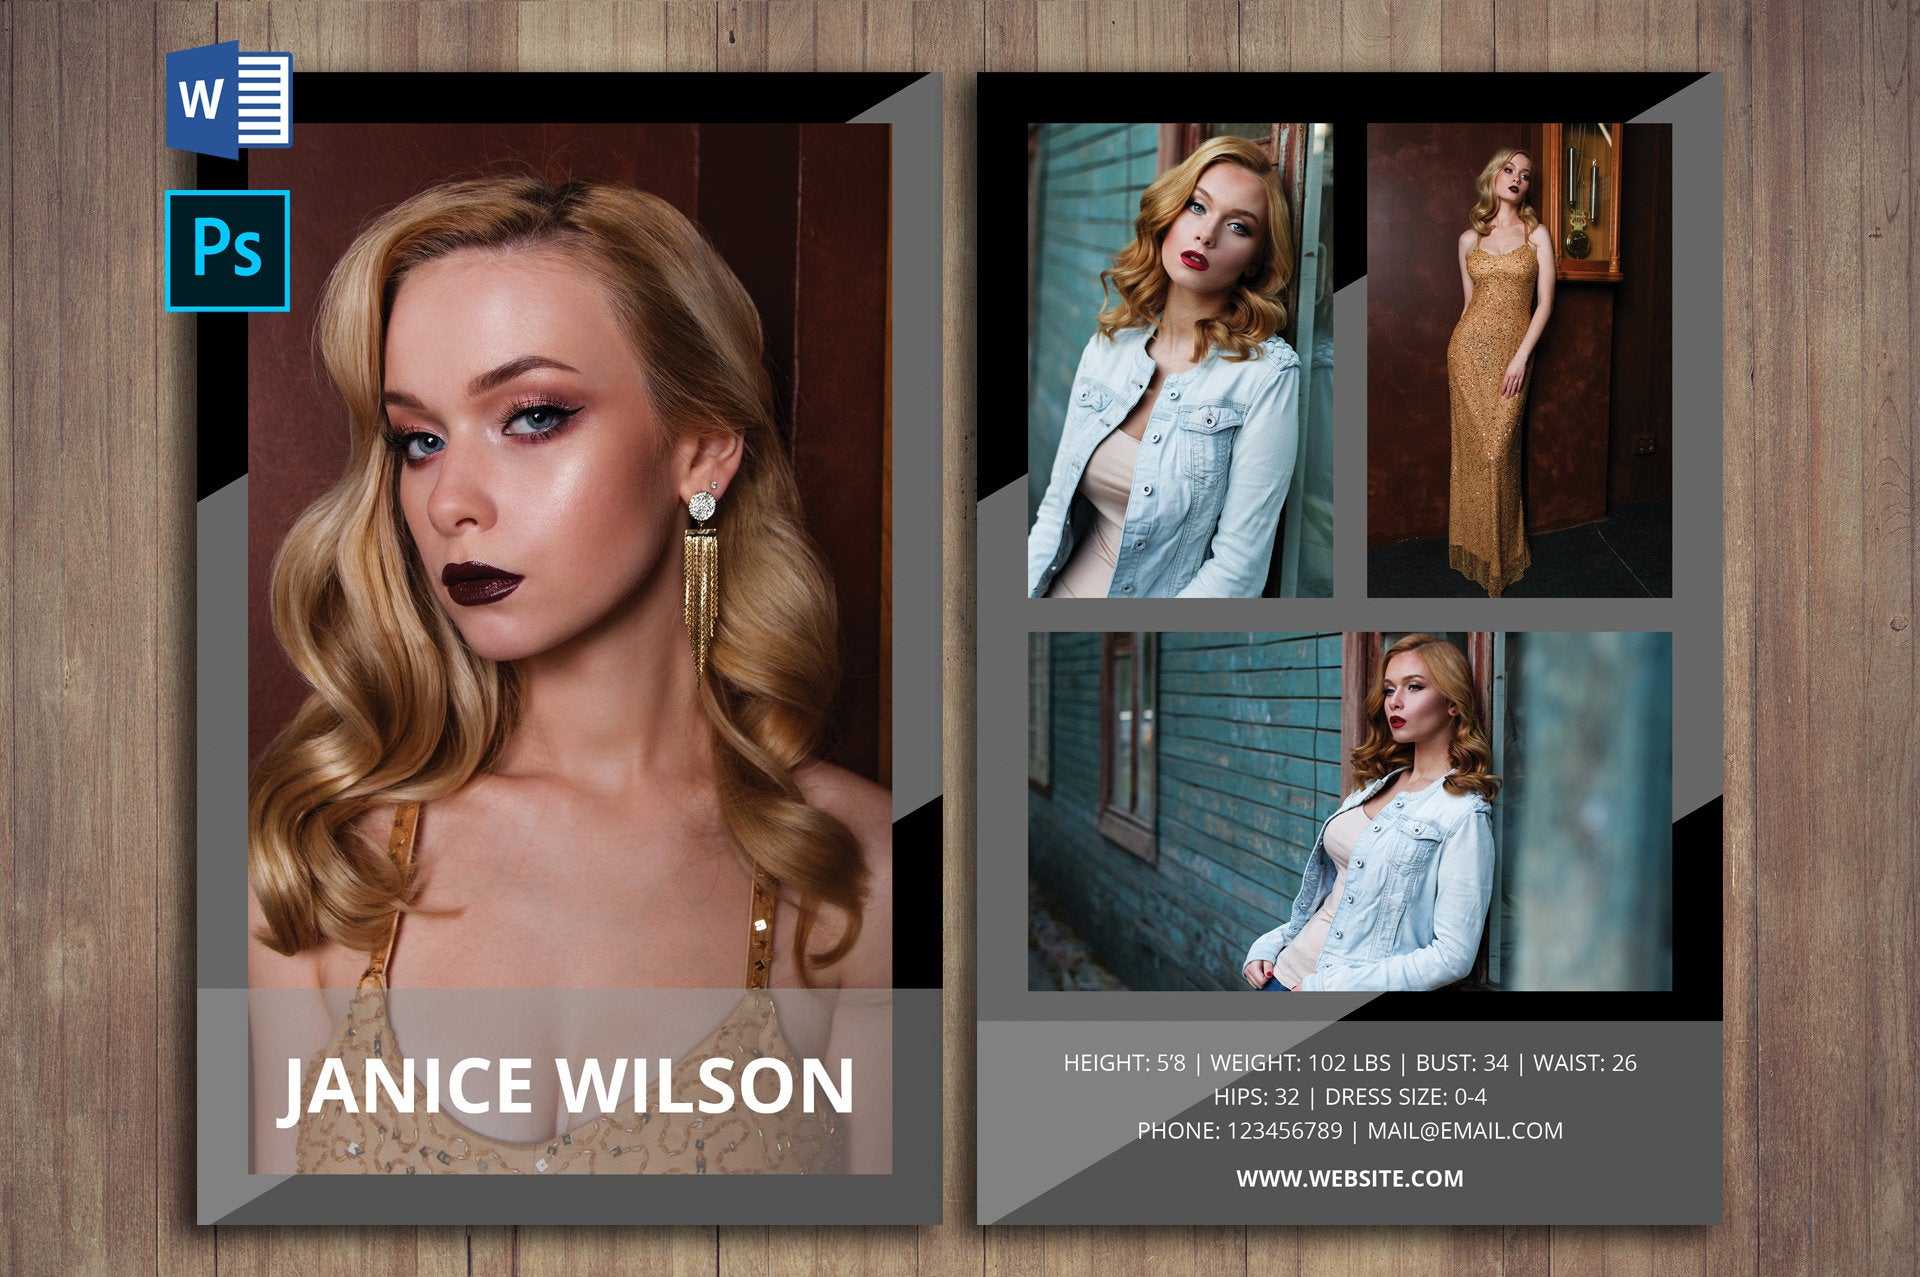 Modeling Comp Card Template, Word Template, Photoshop Template, Instant  Download, Docx Files, Psd Template, Professional Comp Card Template Throughout Comp Card Template Psd